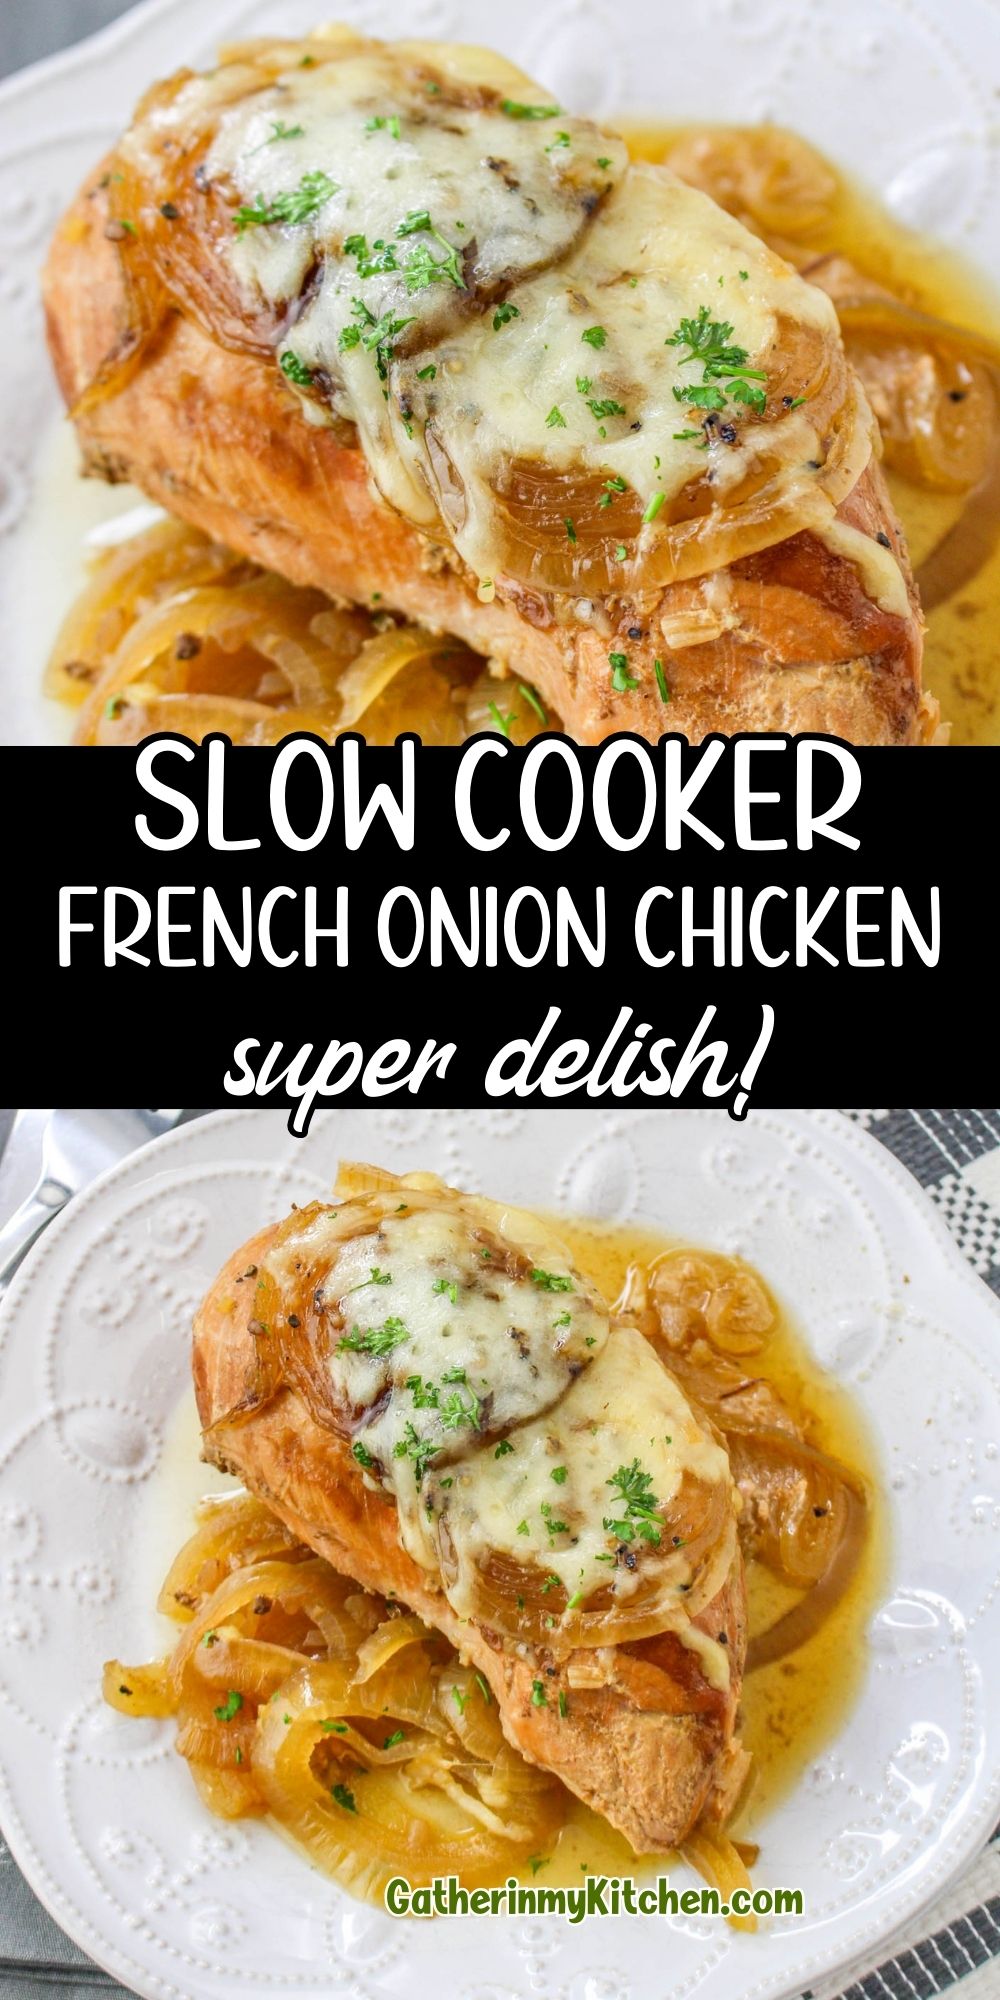 Pin image: top and bottom are pics of French onion chicken and middle says "Slow Cooker French Onion Chicken super delish".